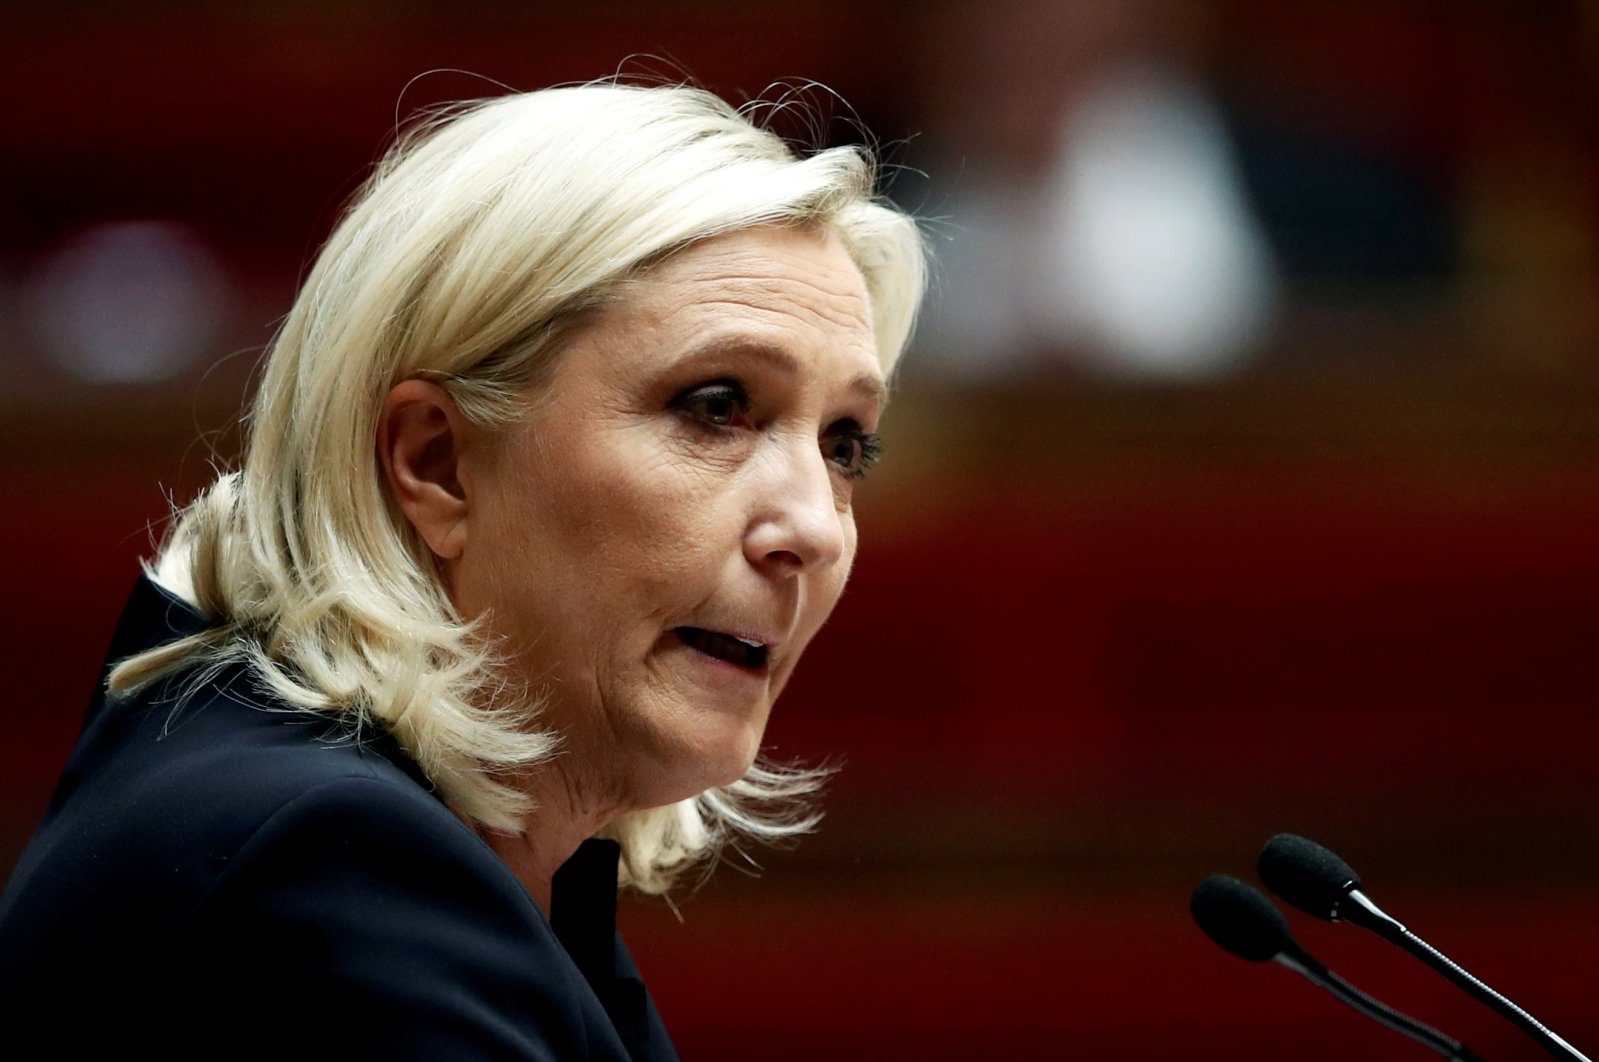 Marine Le Pen, a member of parliament and leader of the French far-right National Rally (Rassemblement National) party, delivers a speech during a debate on immigration at the National Assembly, Paris, France, October 7, 2019. (REUTERS Photo)